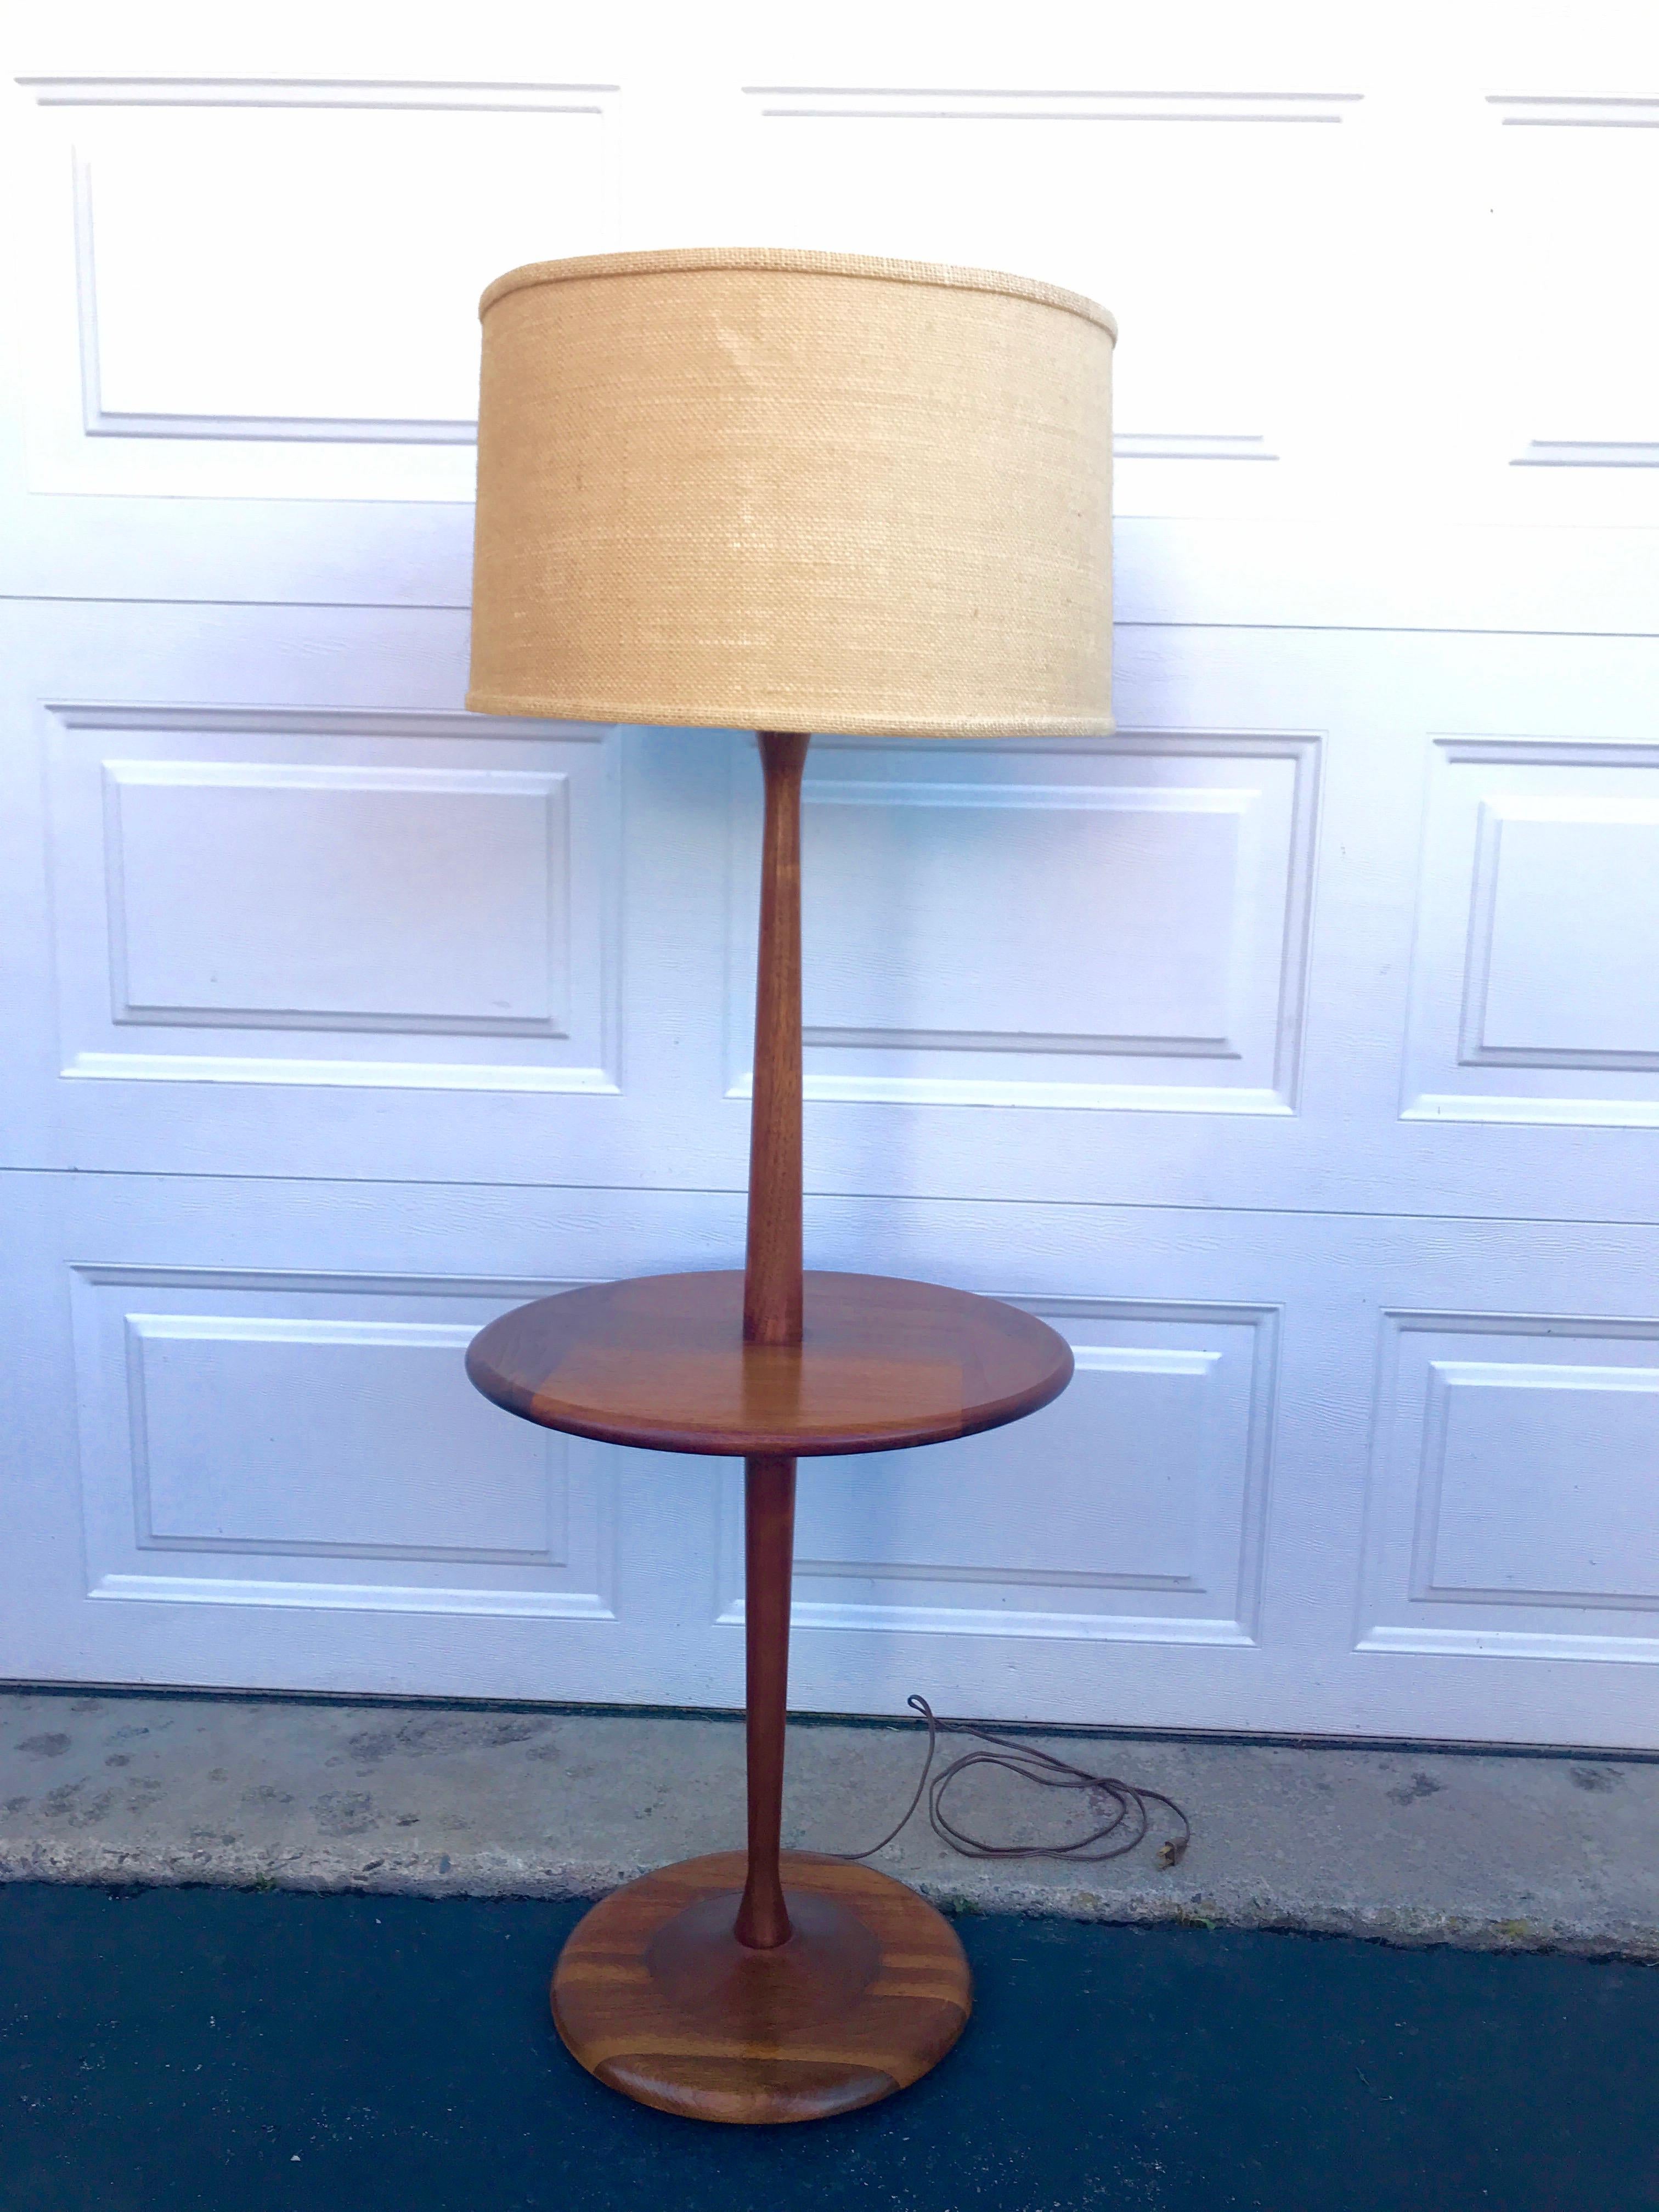 American Laurel Walnut Mid-Century Modern Floor Lamp with Table, circa 1960s For Sale